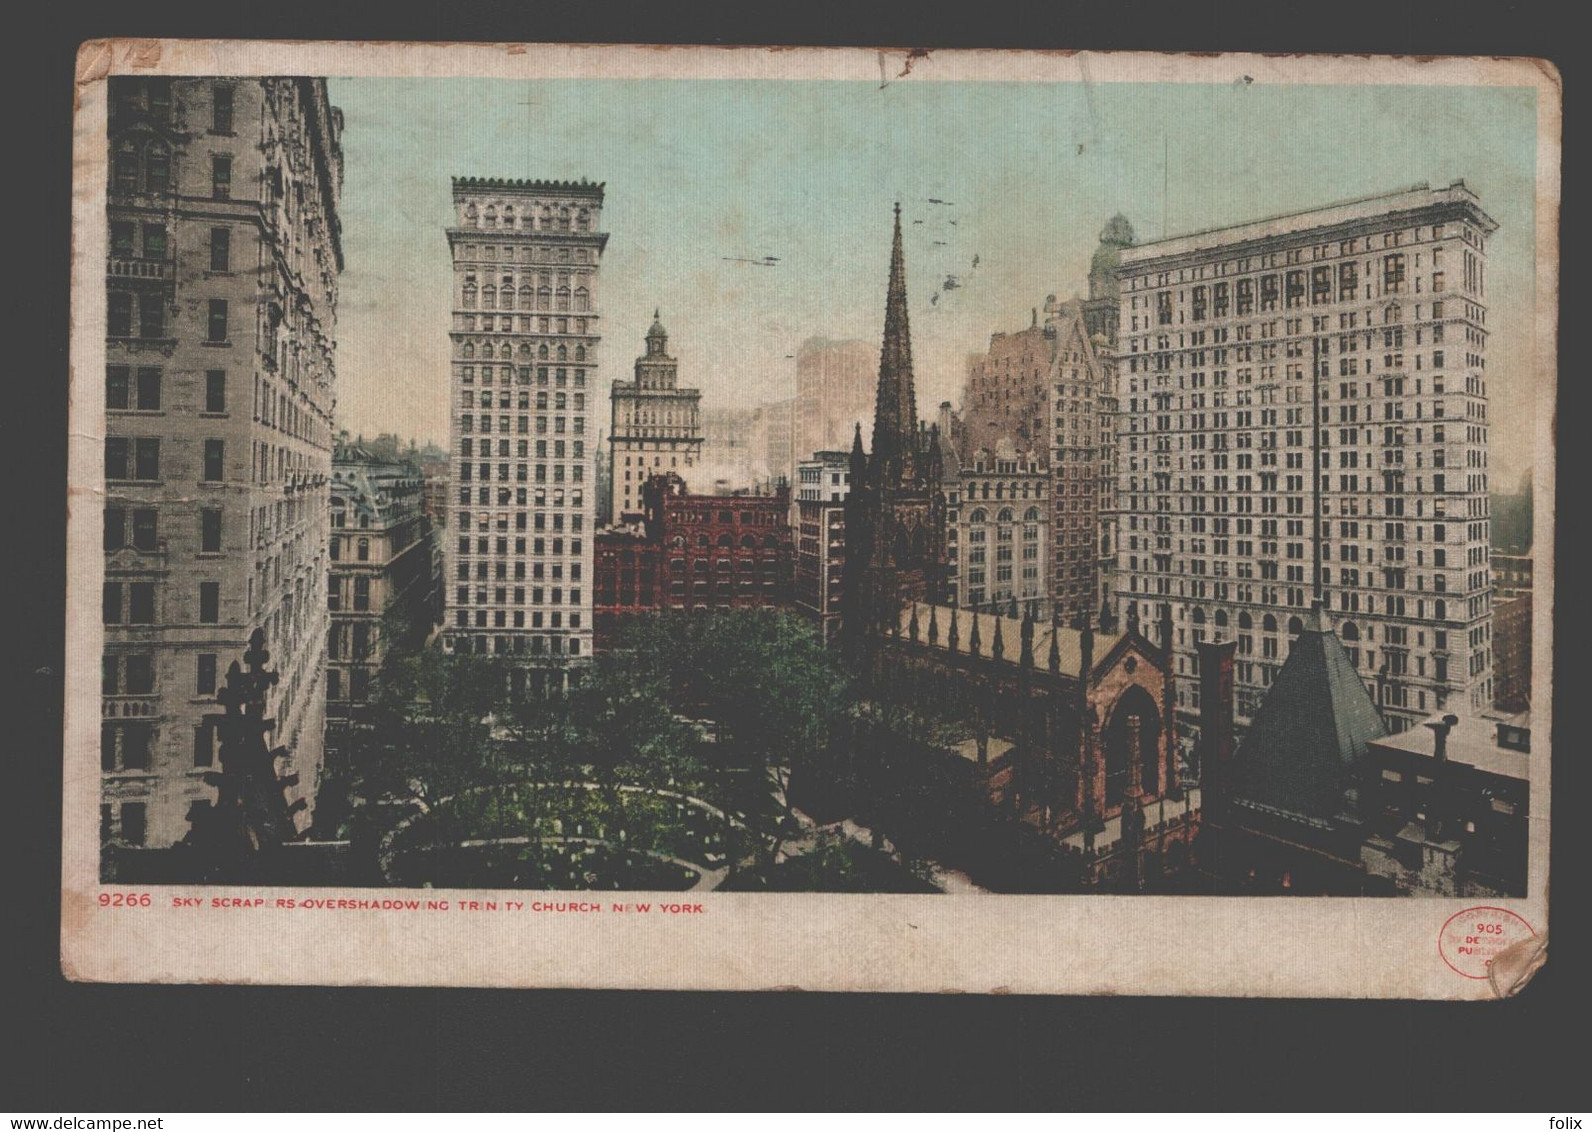 New York - Sky Scrapers Overshadowing Trinity Church - 1908 - Multi-vues, Vues Panoramiques